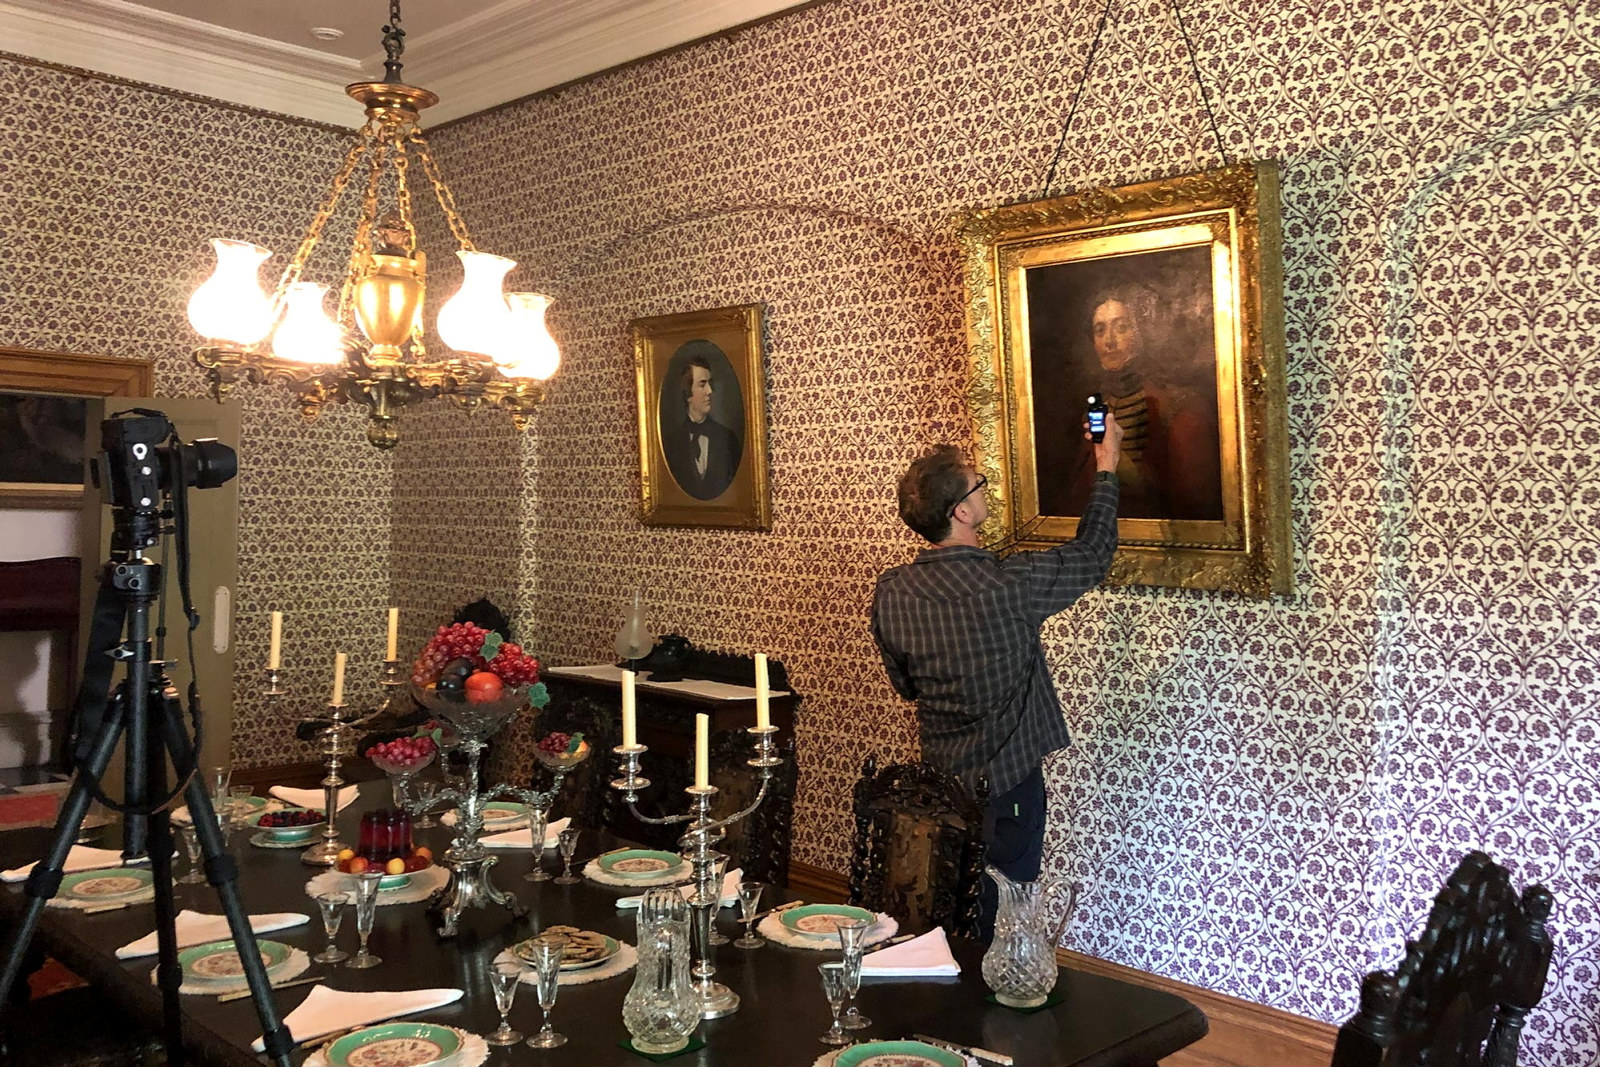 Man takes a light meter reading in preparation for photographing a painting in the Vaucluse House dining room.